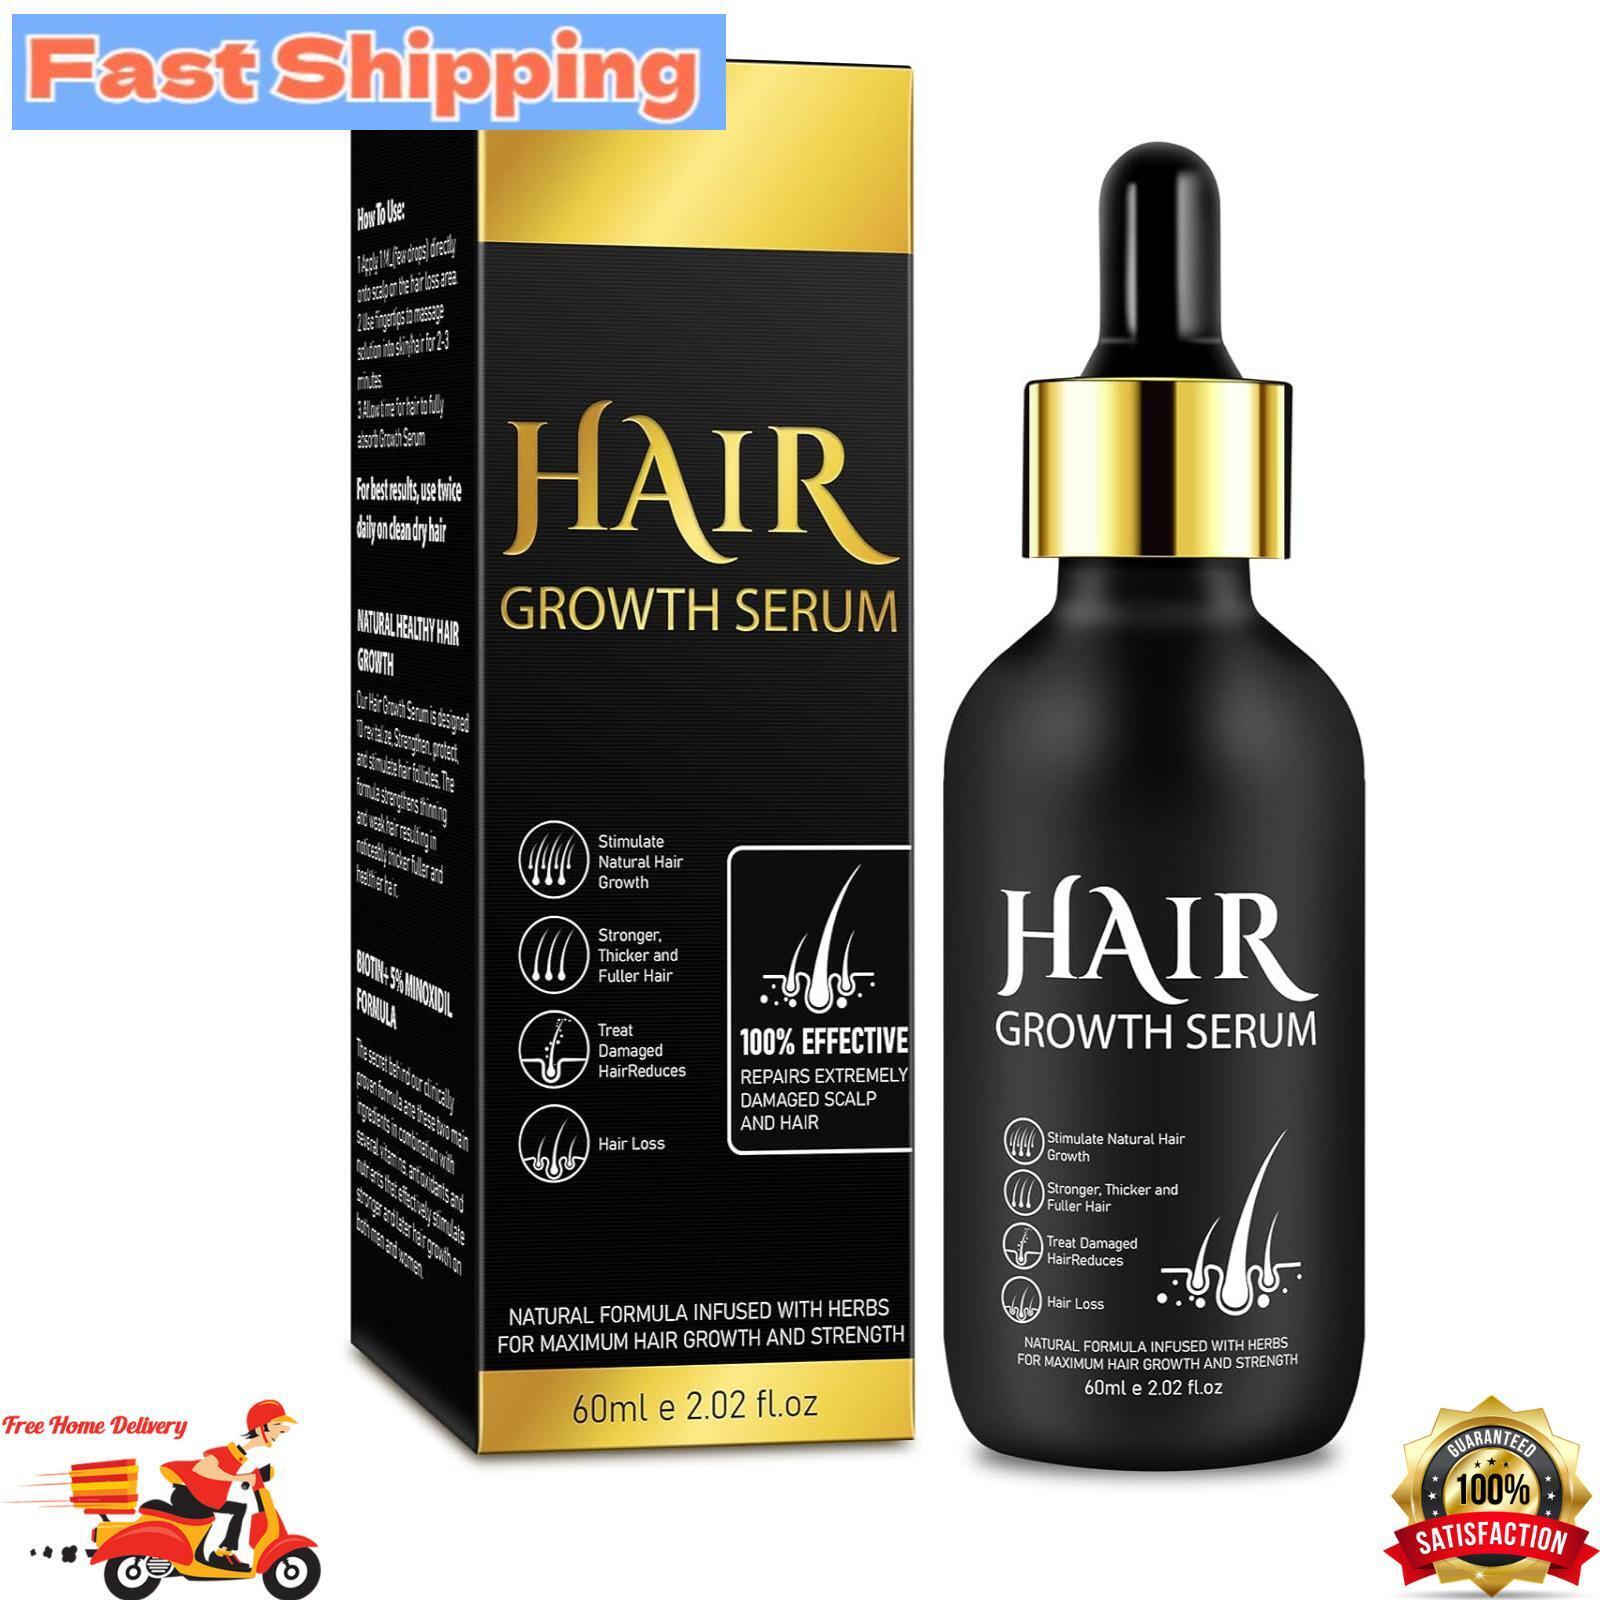 5% Minoxidil Hair Growth Serum for Men and Women, Hair Growth Oil Hair Regrowth